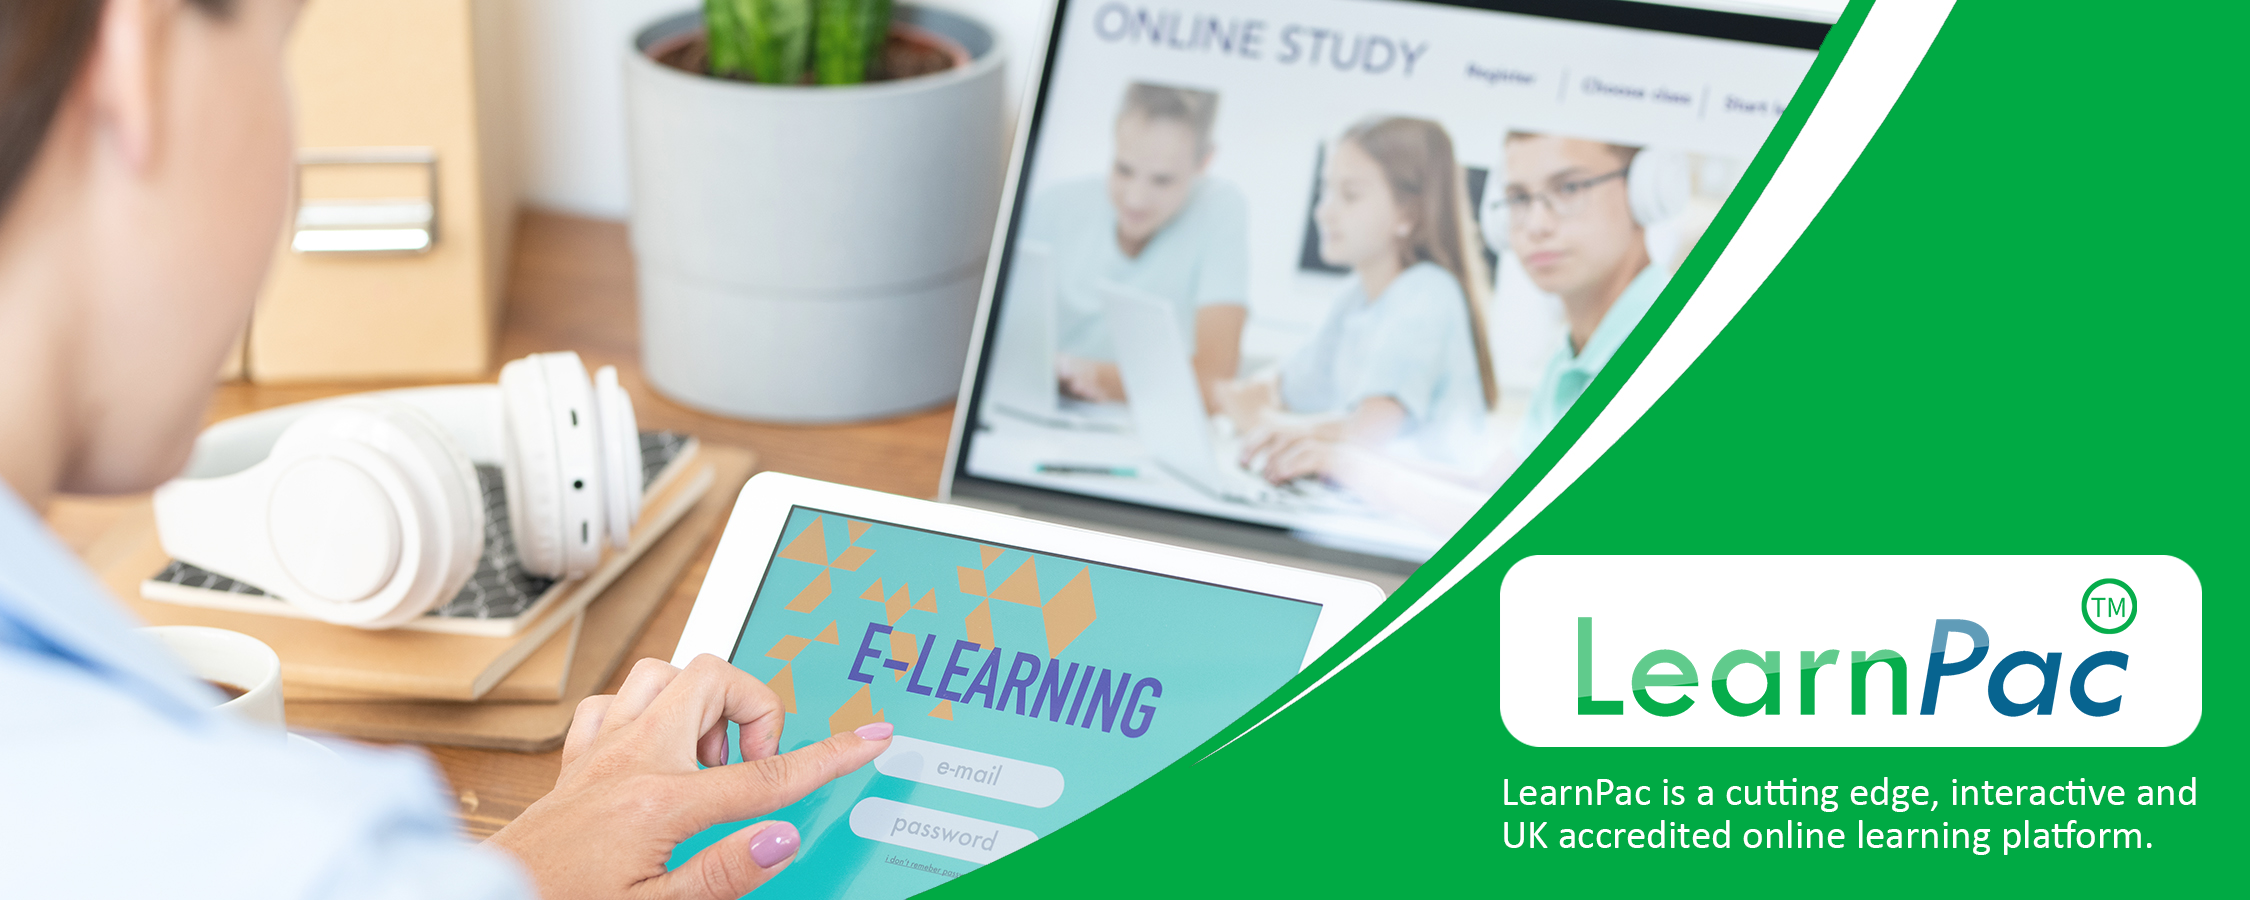 Care Certificate Standard 6 - Communication - E-Learning Course - LearnPac Systems UK -